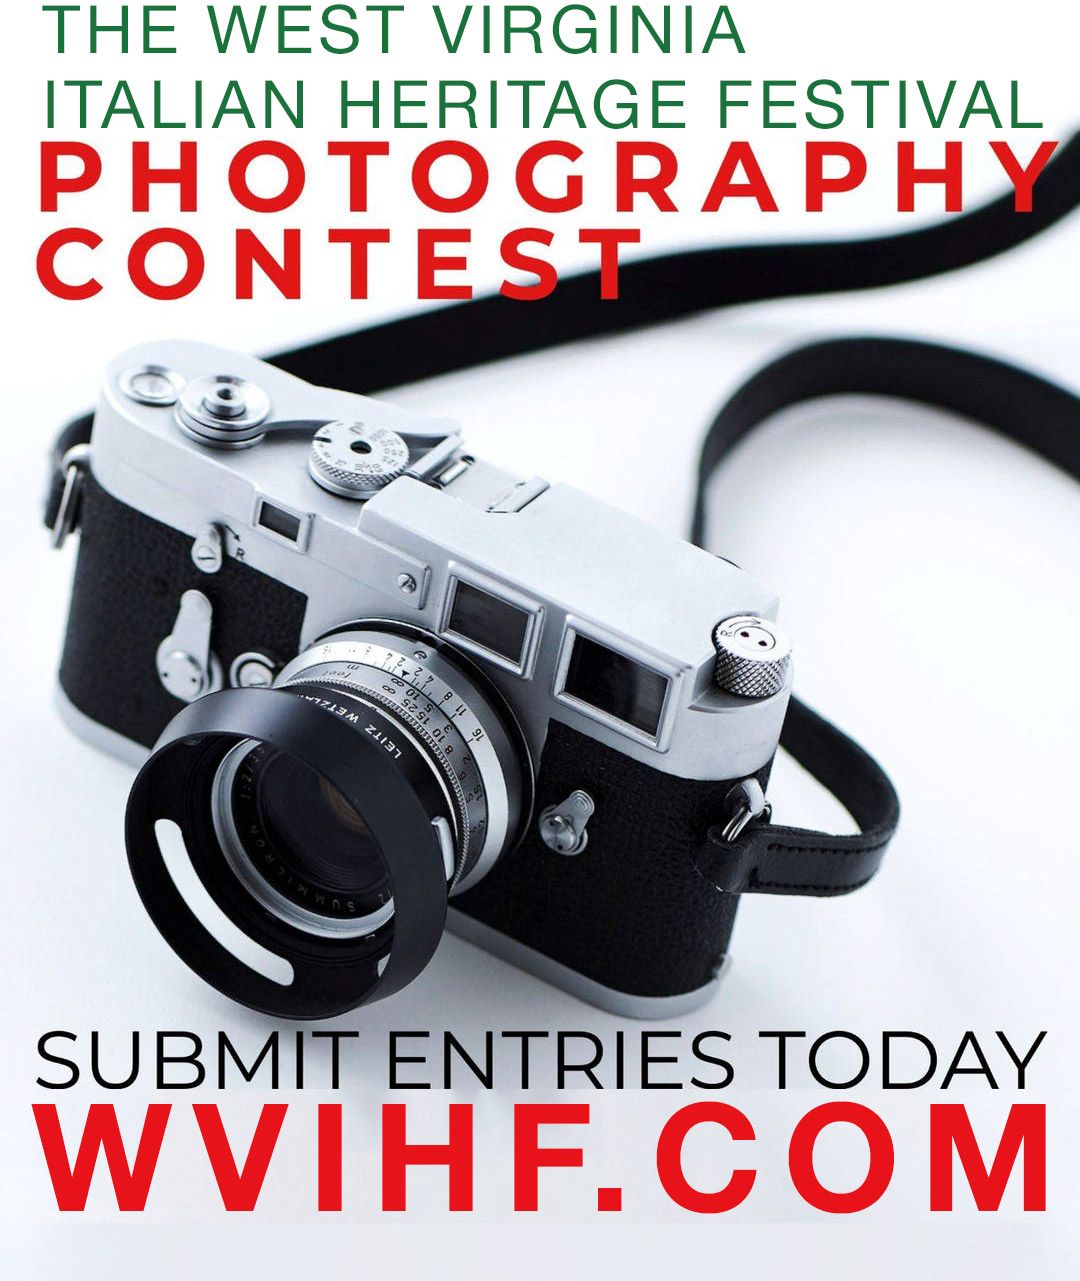 Photography Contest for Italian Heritage Festival